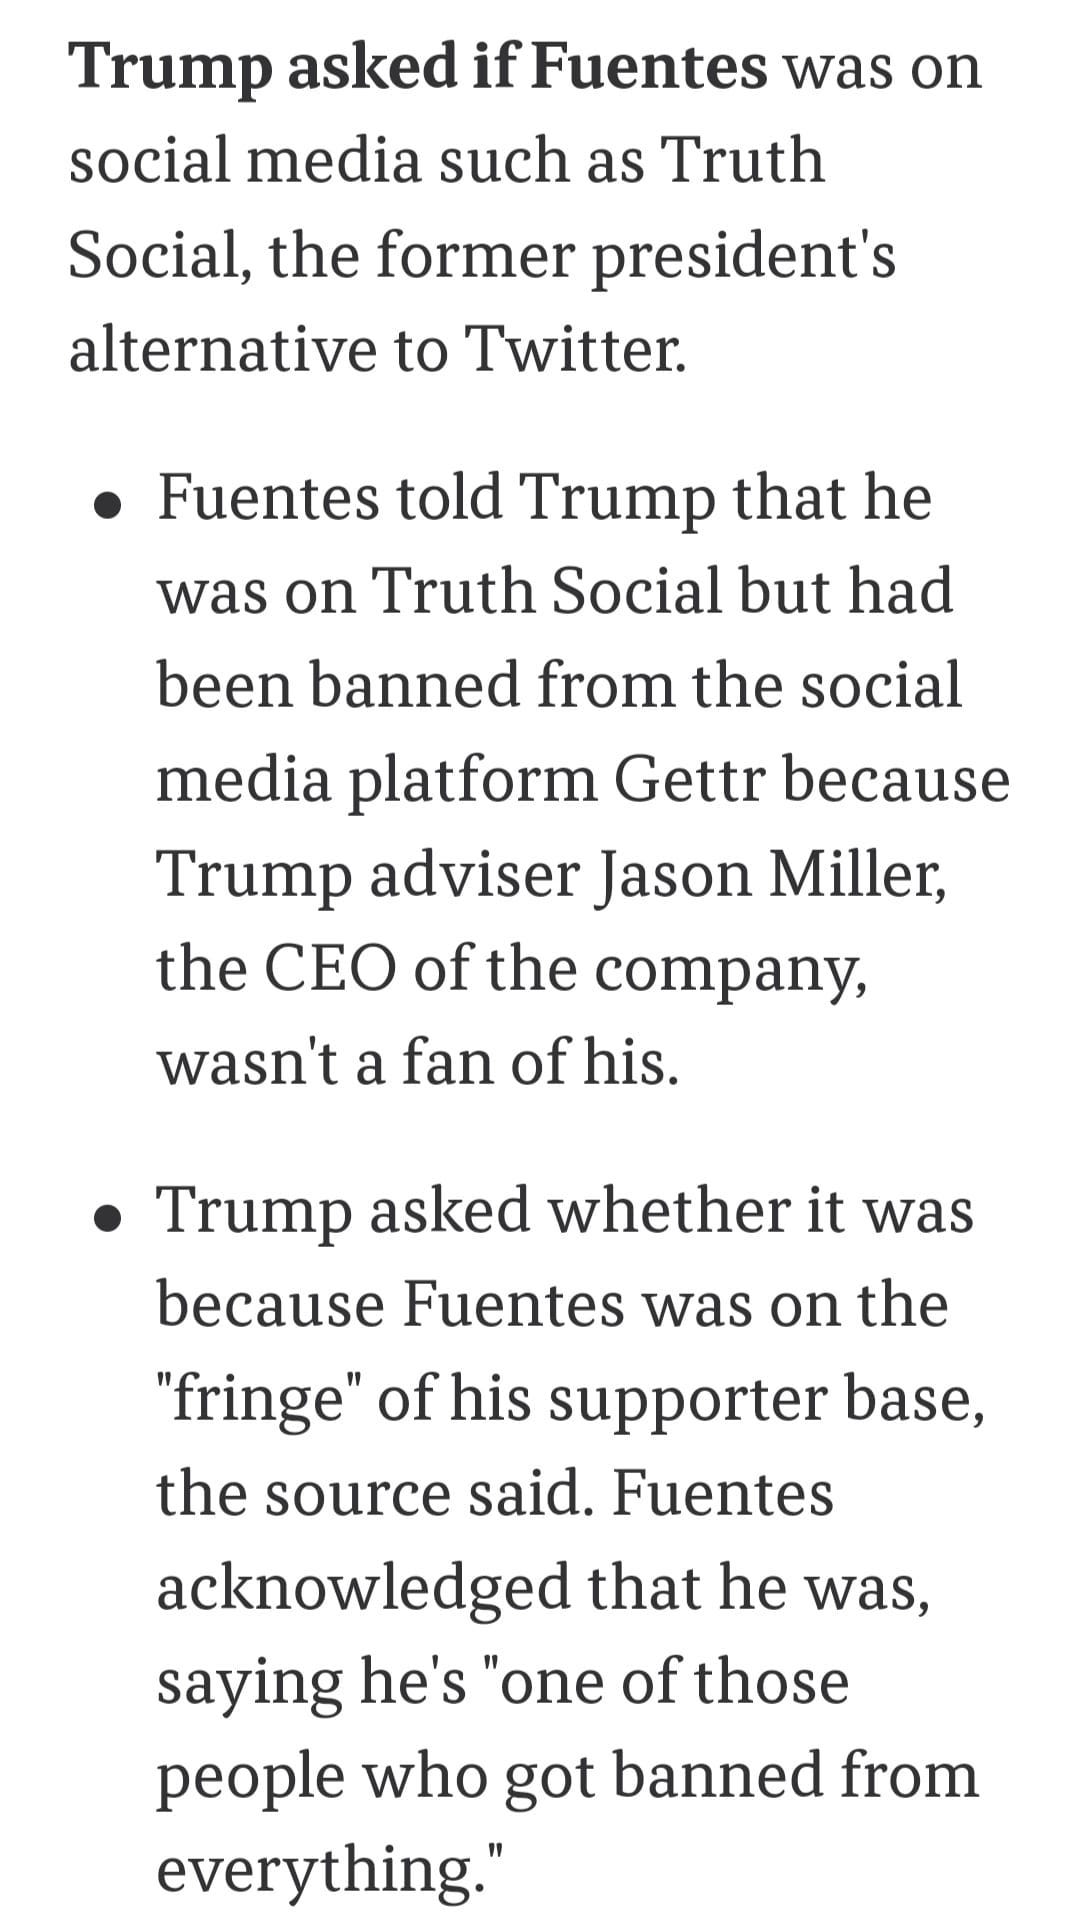 May be a Twitter screenshot of one or more people and text that says 'Trump asked ifFuentes was on social media such as Truth Social, the former president's alternative to Twitter. Fuentes told Trump that he was on Truth Social but had been banned from the social media platform Gettr because Trump adviser Jason Miller, the CEO of the company, wasn't a fan of his. Trump asked whether it was because Fuentes was on the "fringe" of his supporter base, the source said. Fuentes acknowledged that he was, saying he's "one of those people who got banned from everything."'